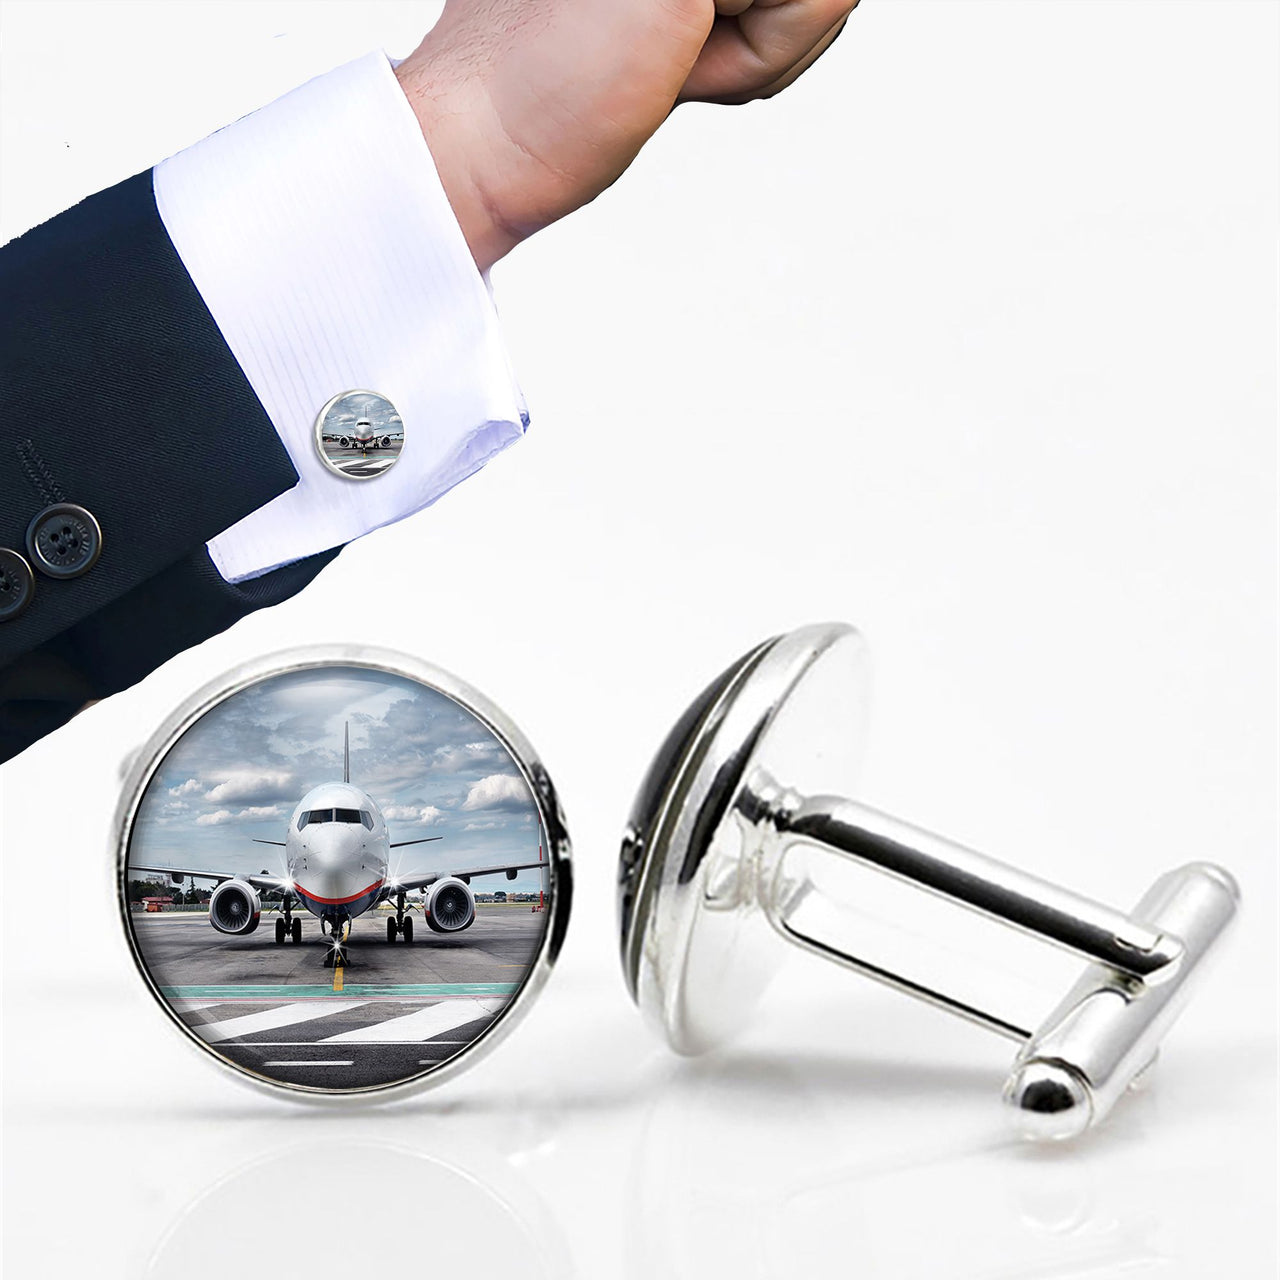 Amazing Clouds and Boeing 737 NG Designed Cuff Links